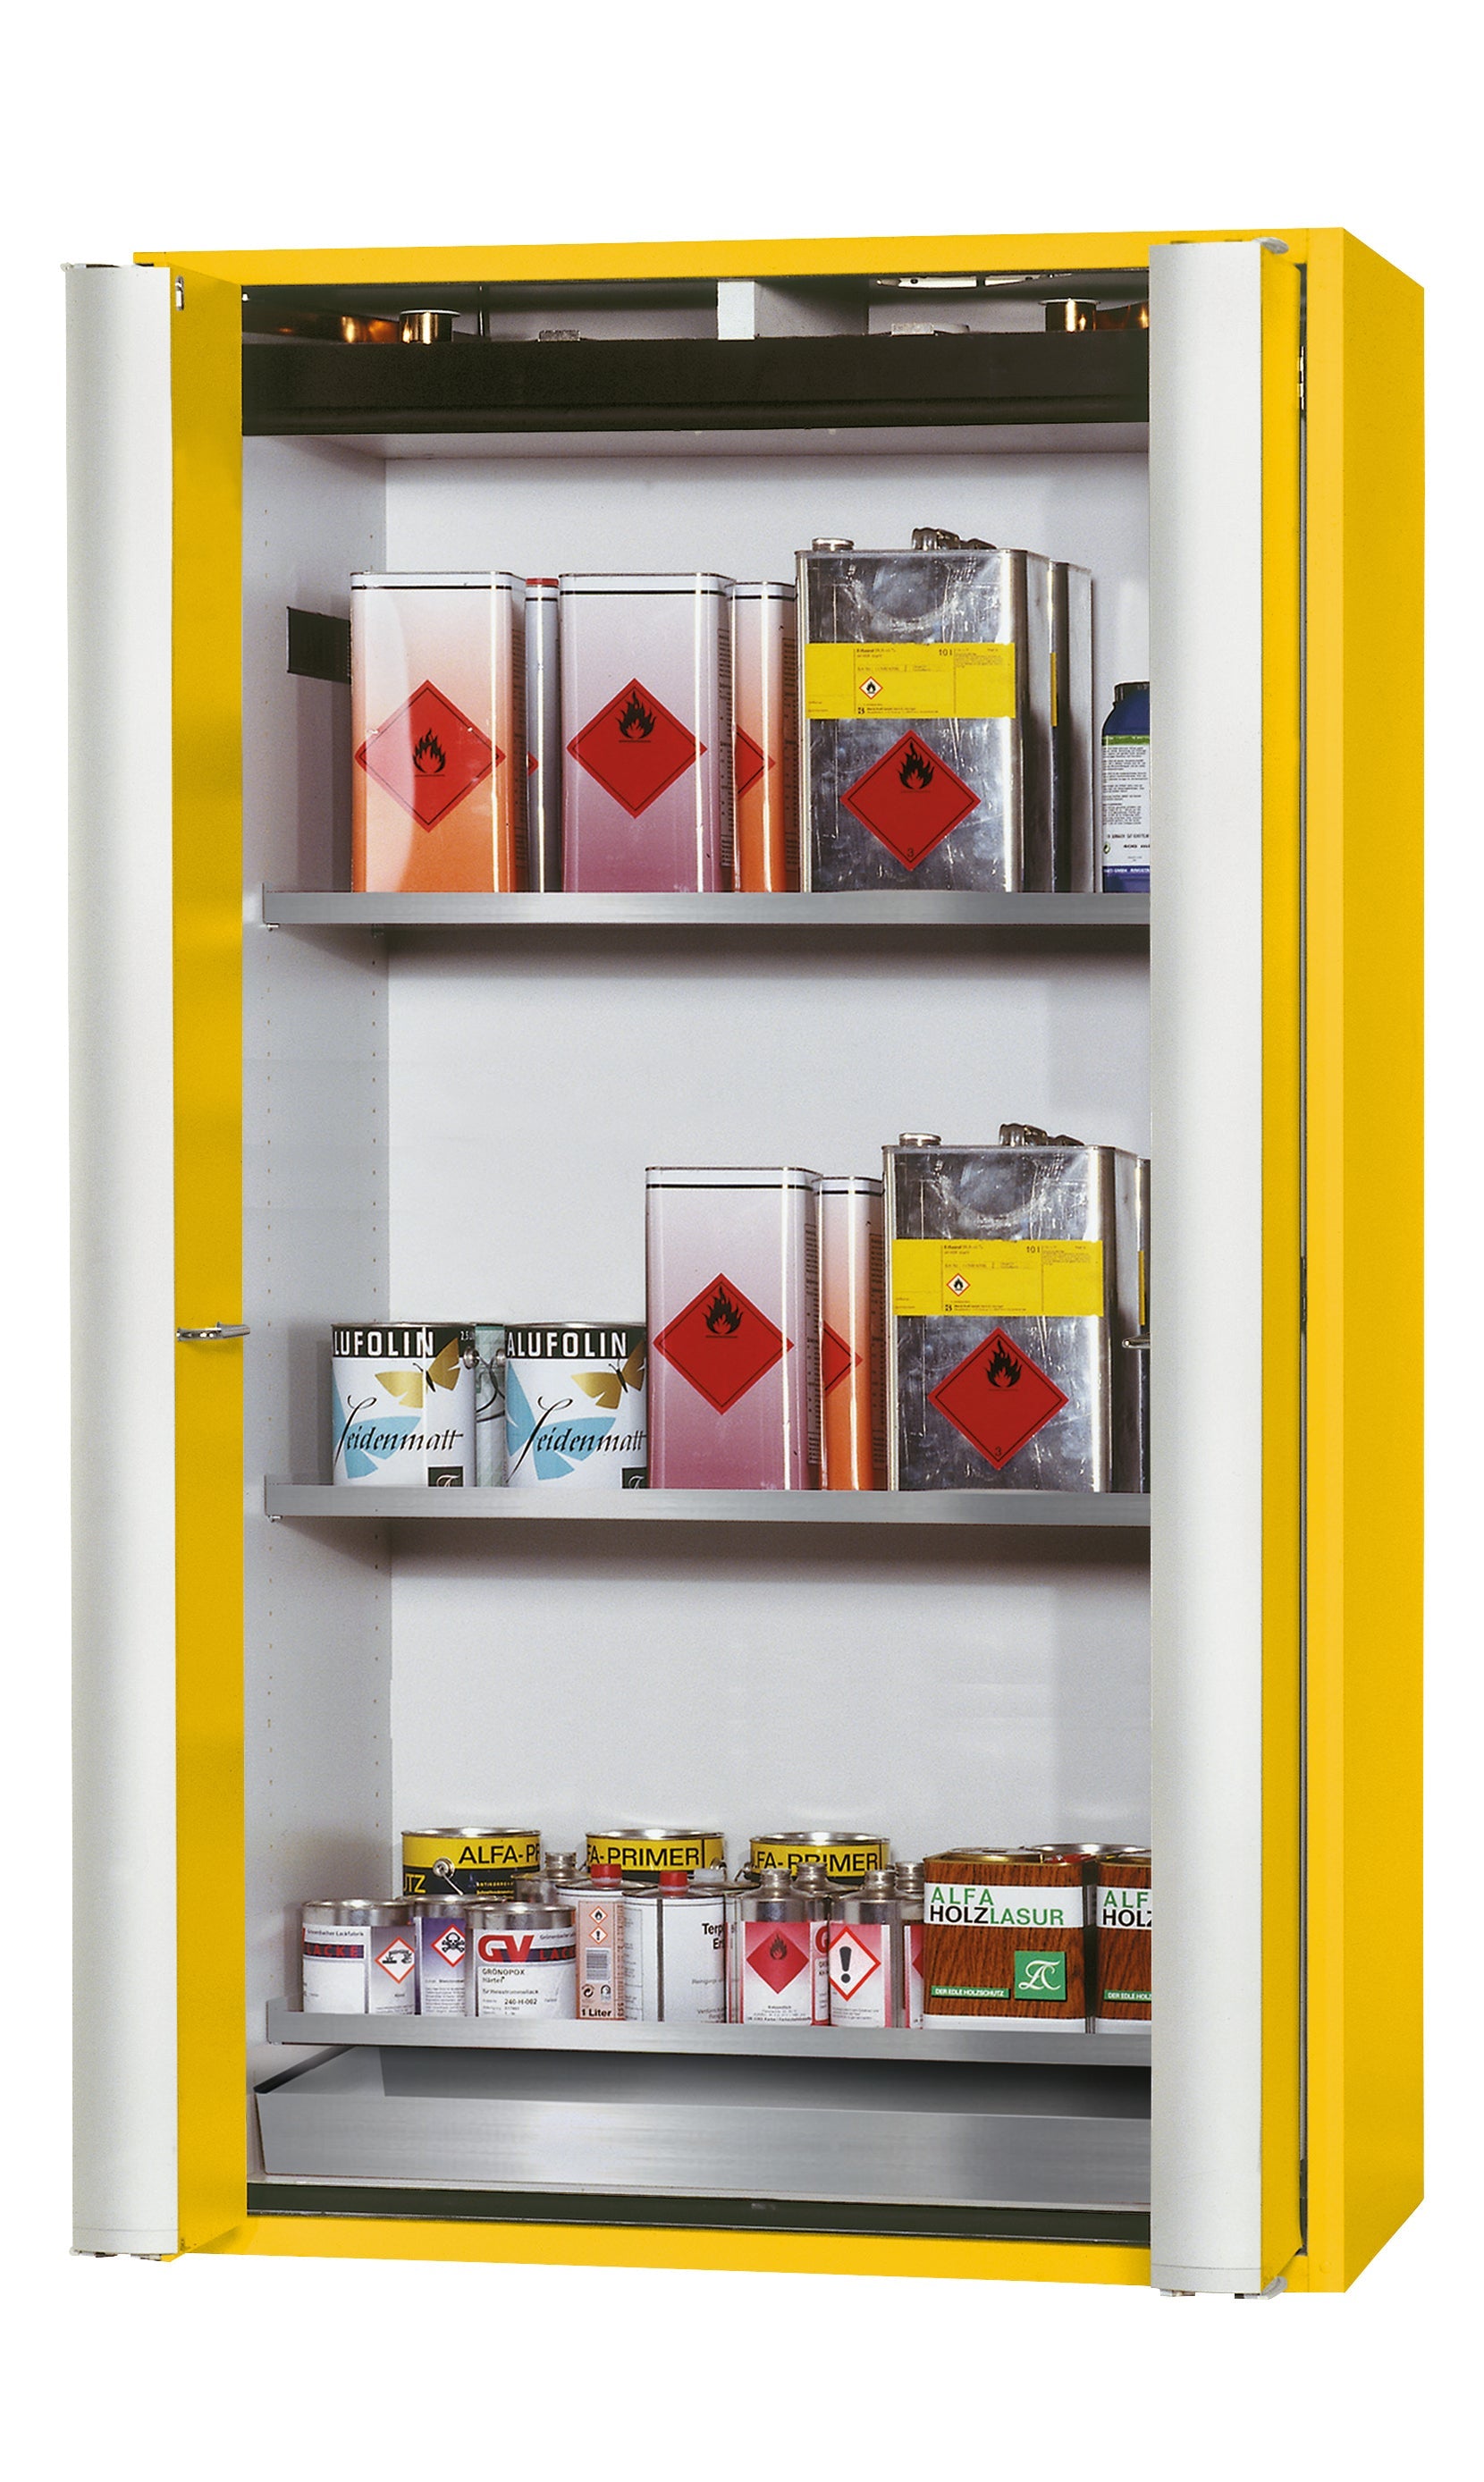 Type 90 safety storage cabinet S-PHOENIX-90 model S90.196.120.FDAS in warning yellow RAL 1004 with 3x shelf standard (stainless steel 1.4301),